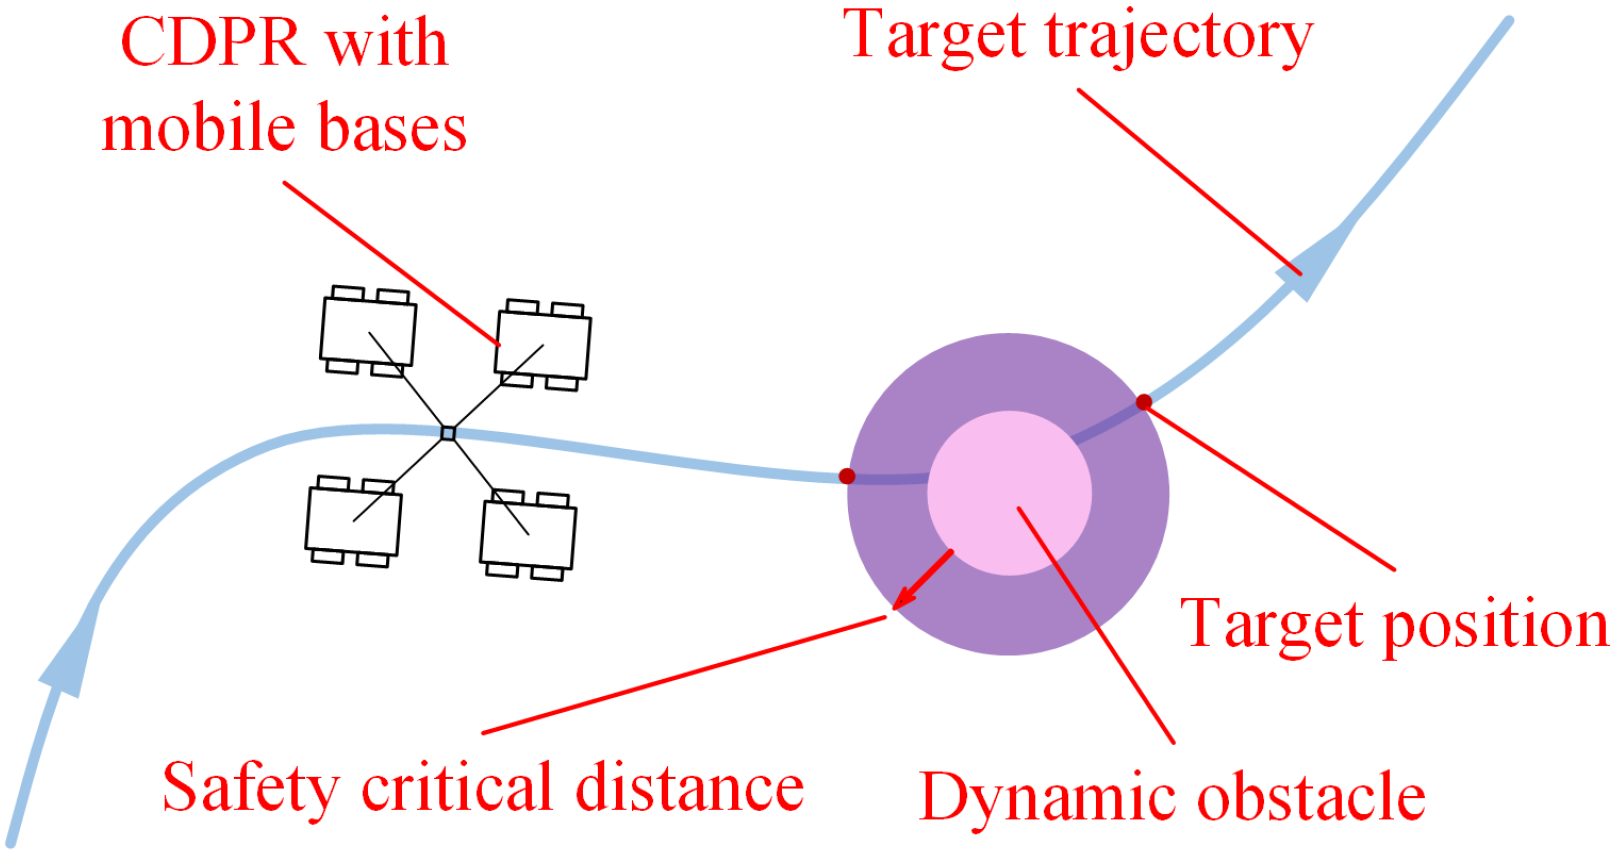 Figure 3: The CDPR may encounter dynamic obstacles while planning its trajectory.